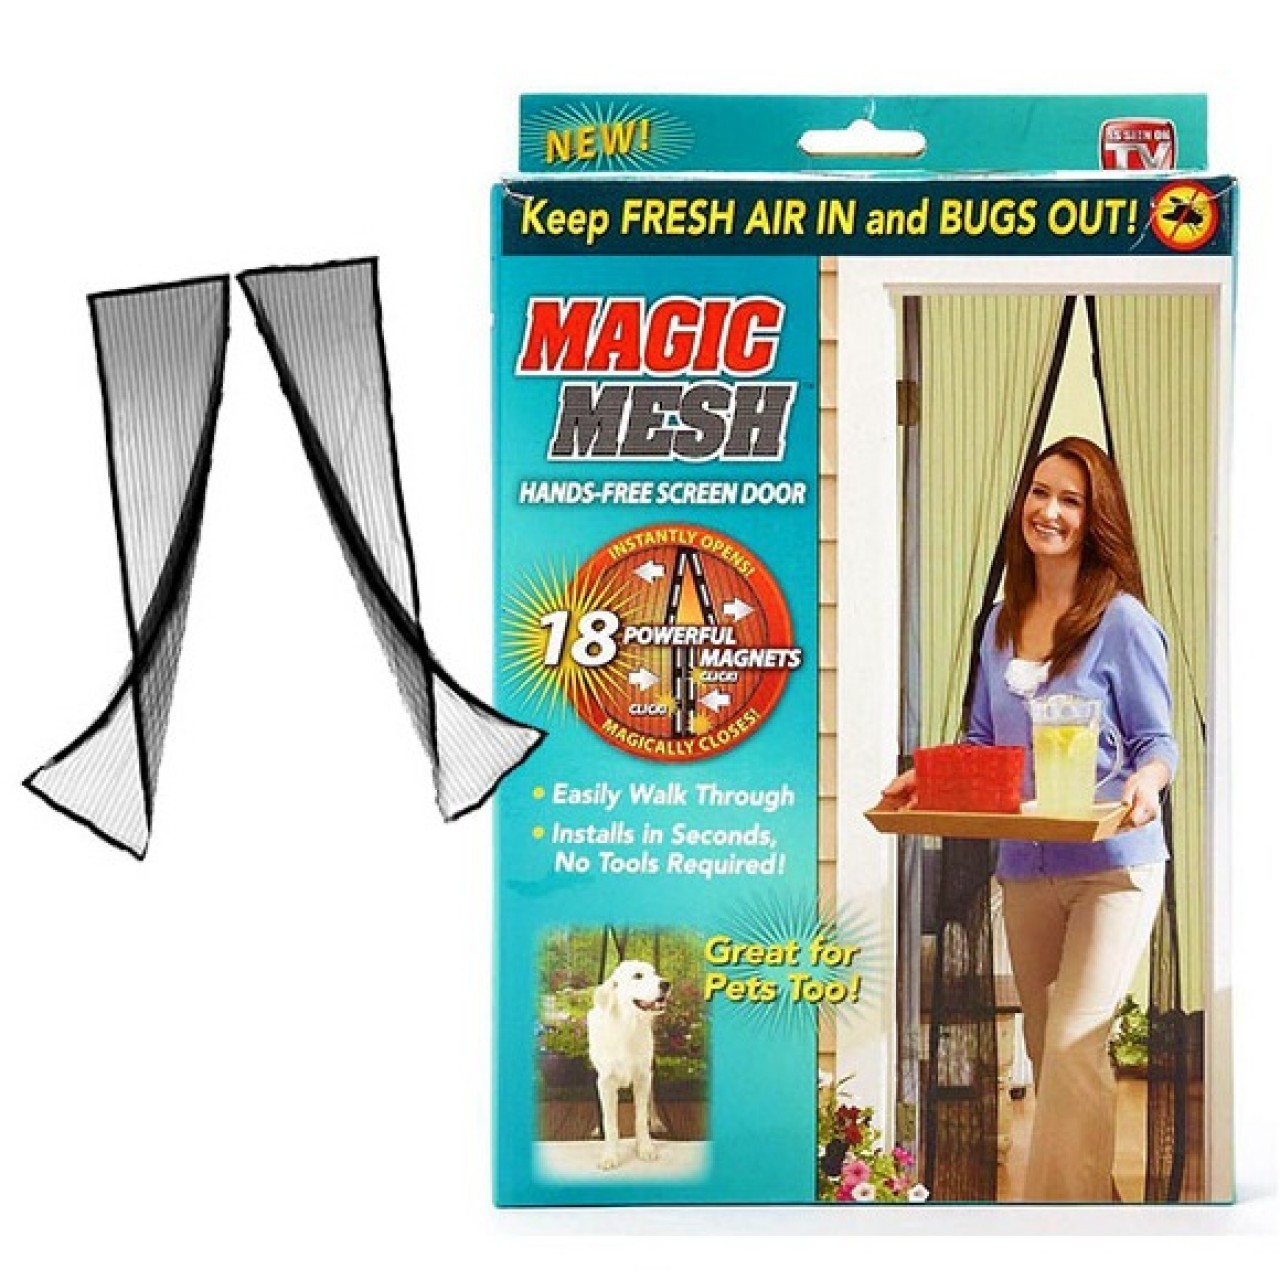 Magic Mesh Hands Free Screen Door - Instantly Opens & Magnetically Closes